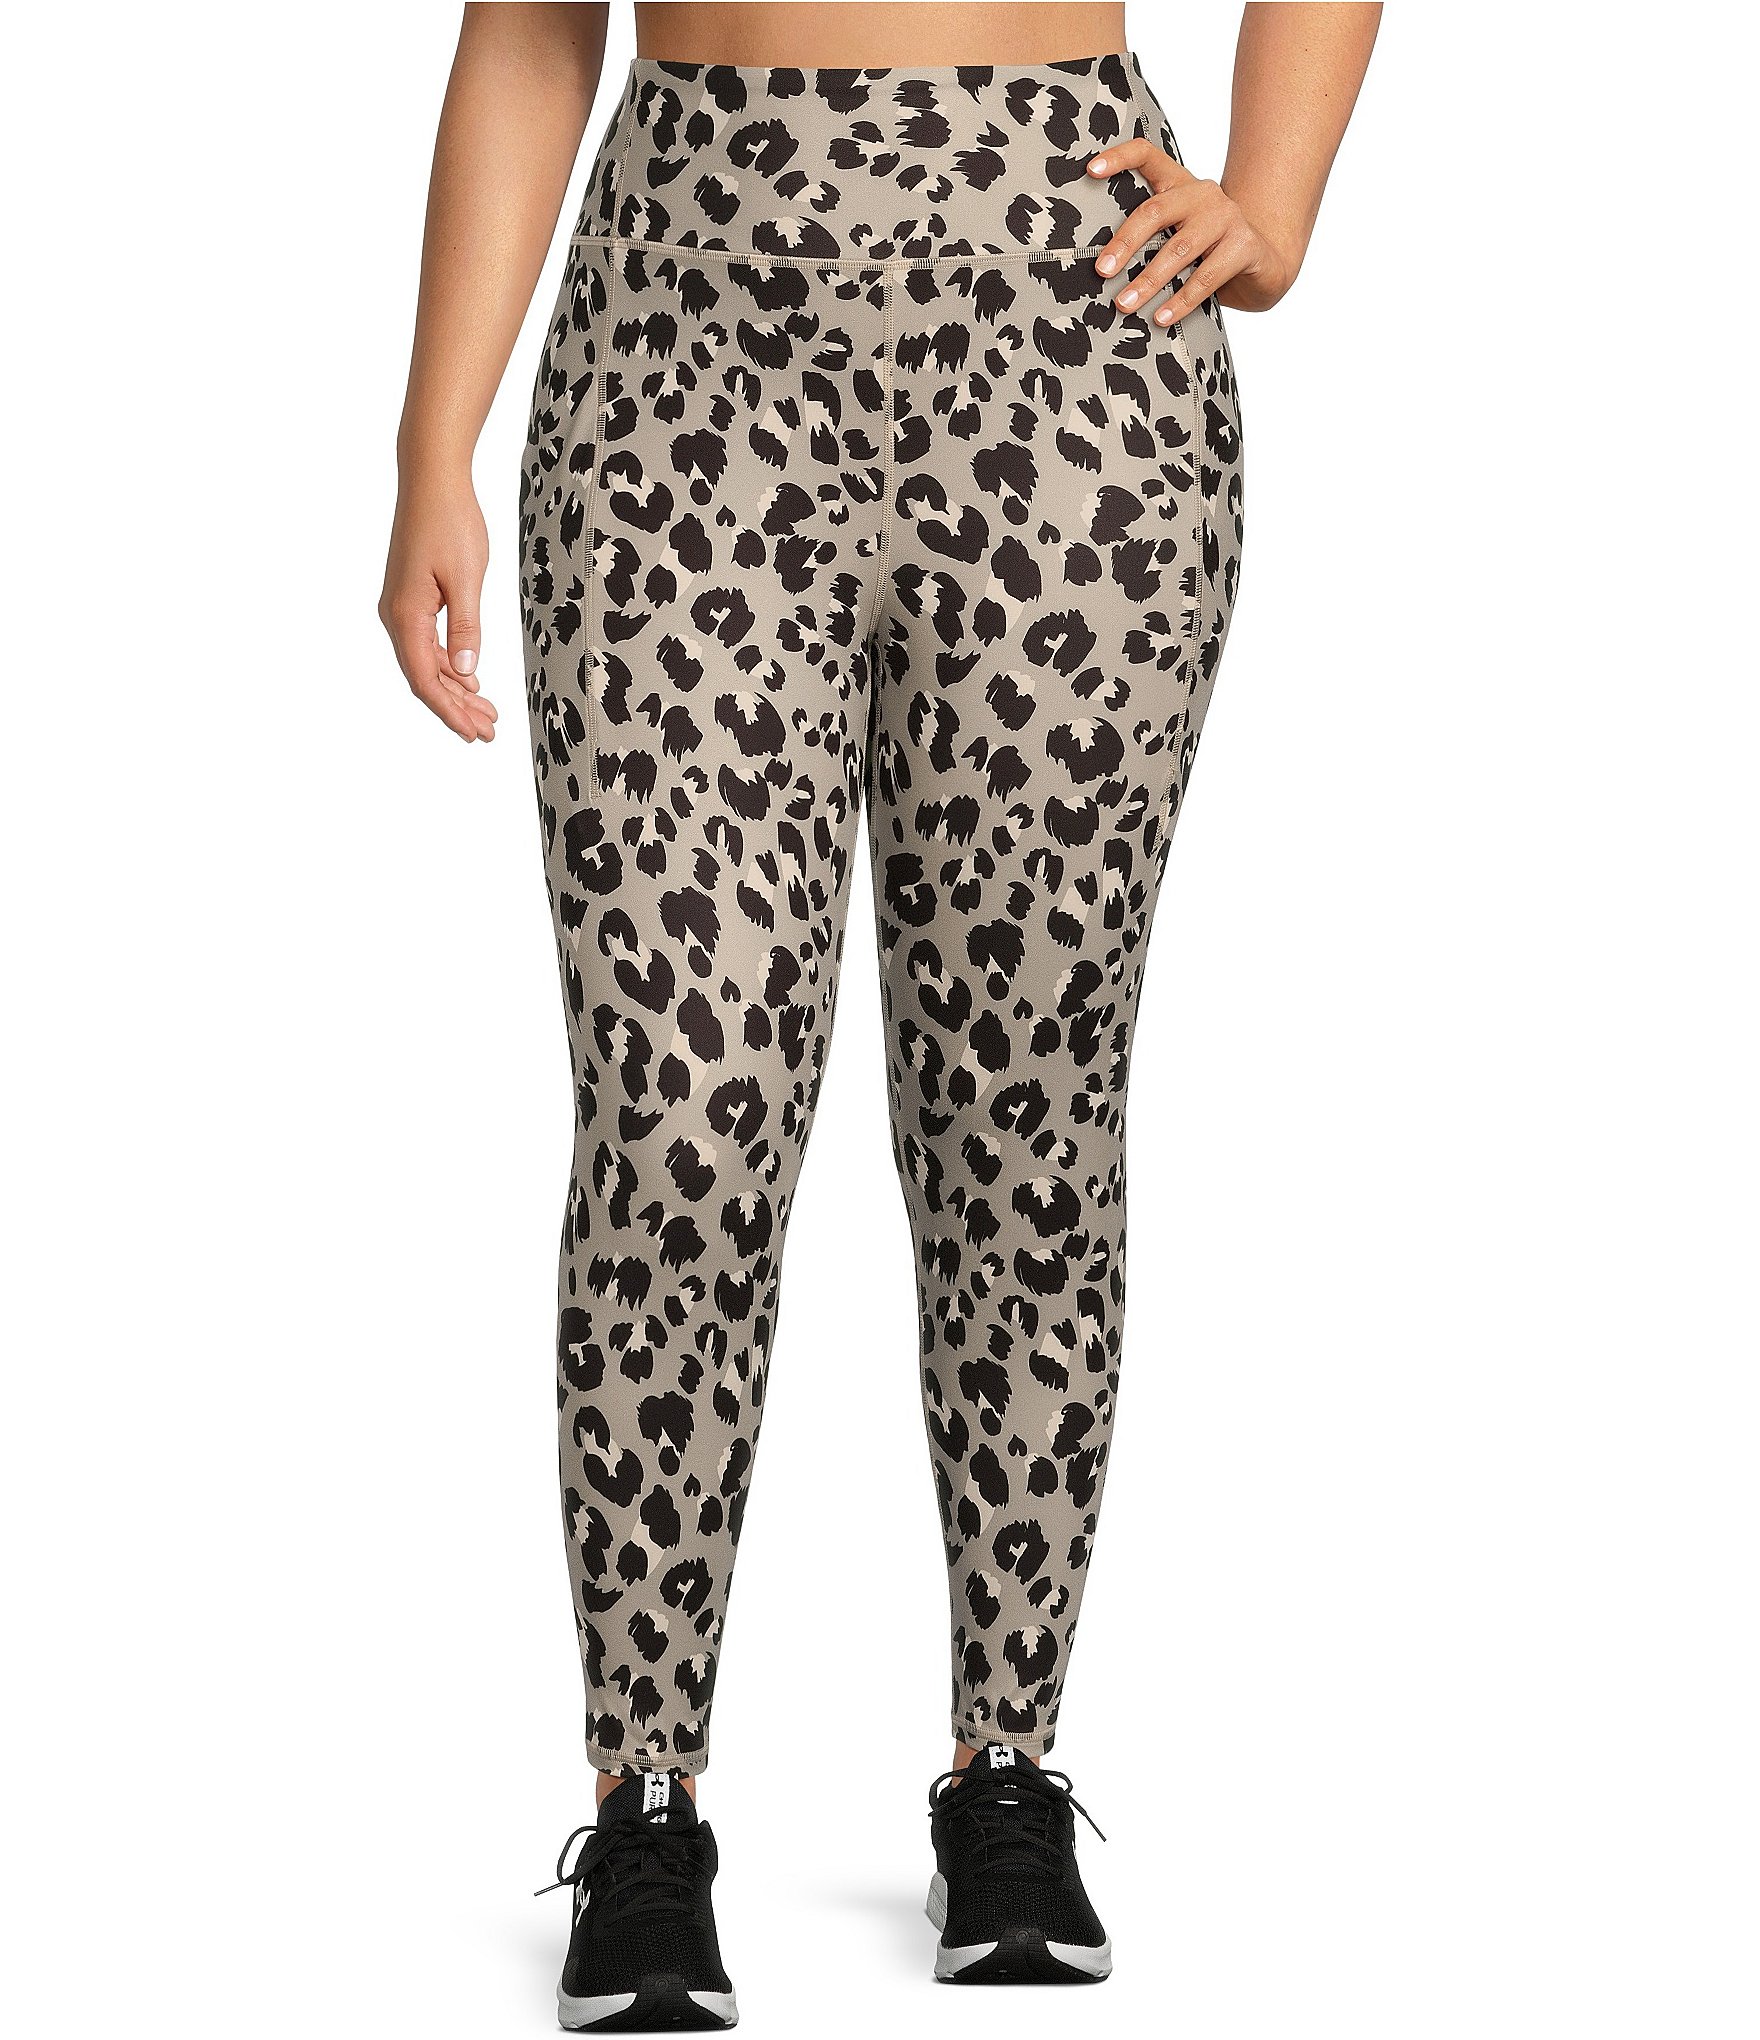 Women's Plus Size Printed Leggings Brown Cheetah One Size Fits Most Plus -  White Mark : Target